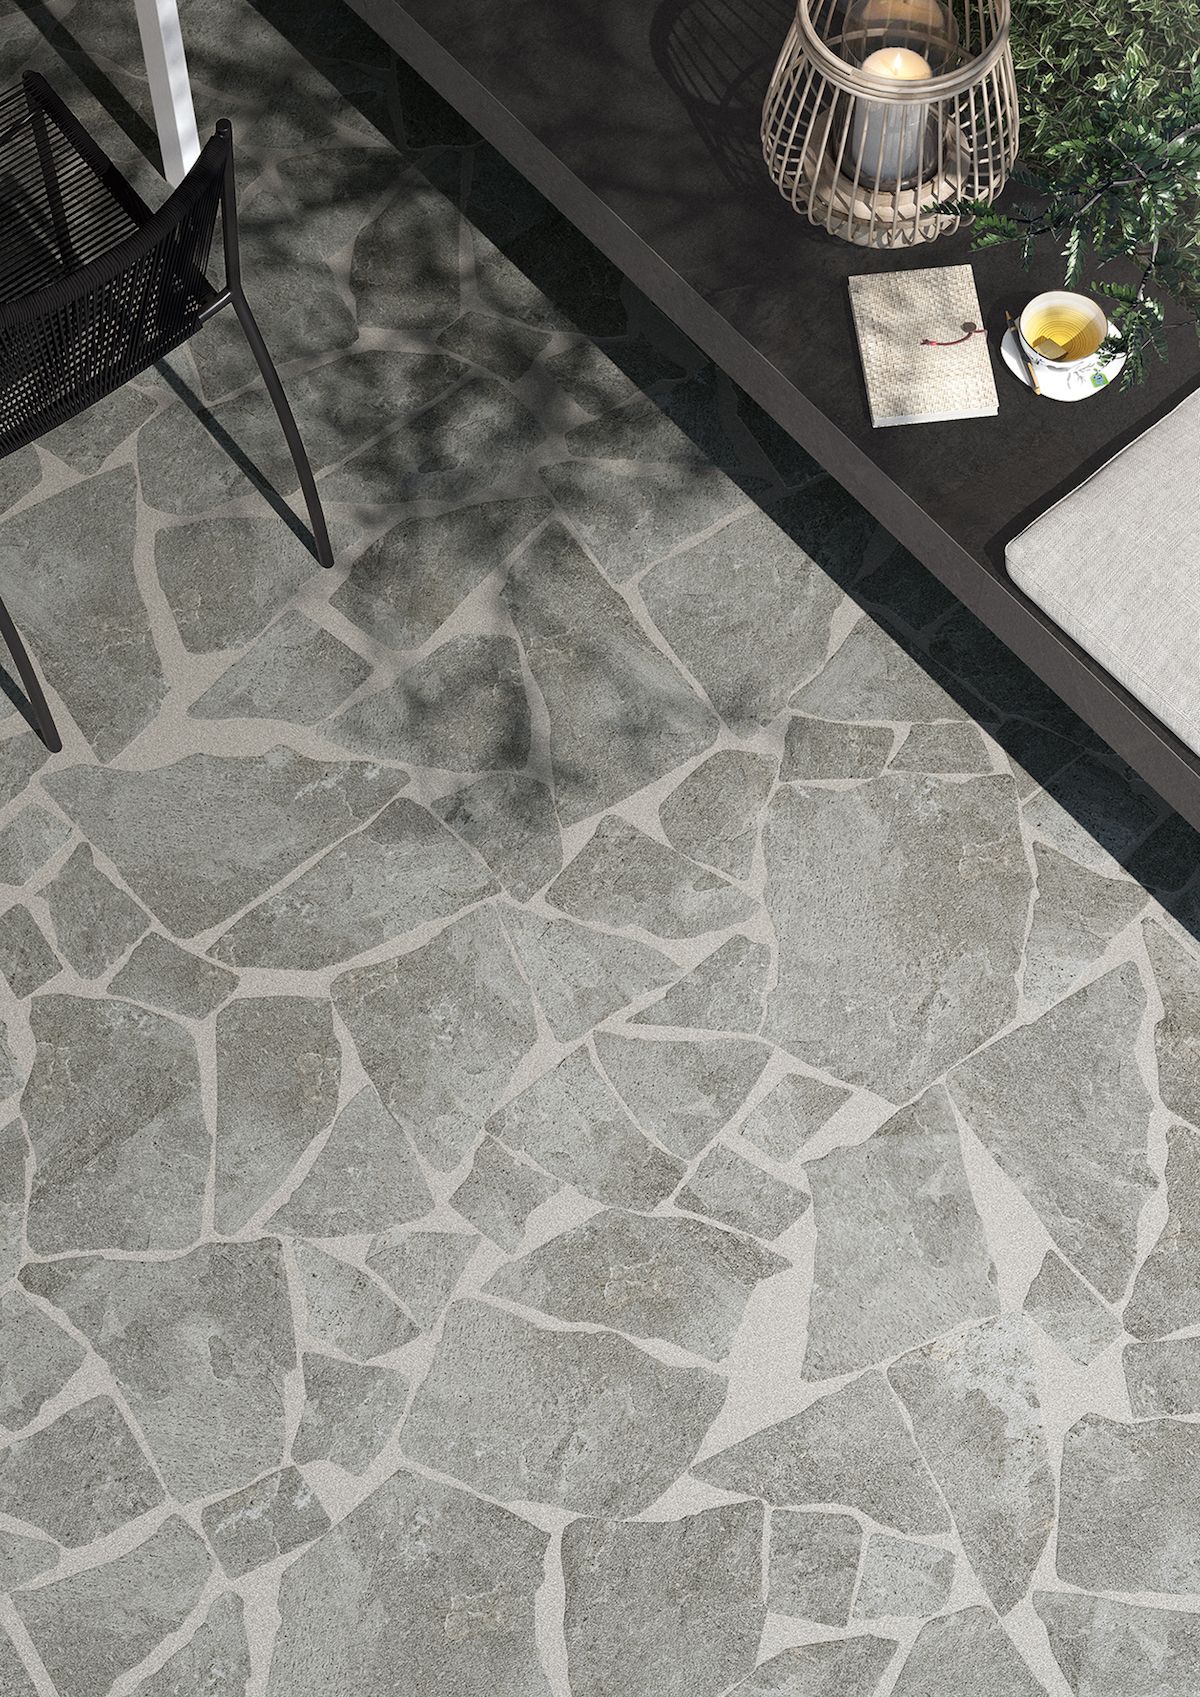 How to look after your slate flooring